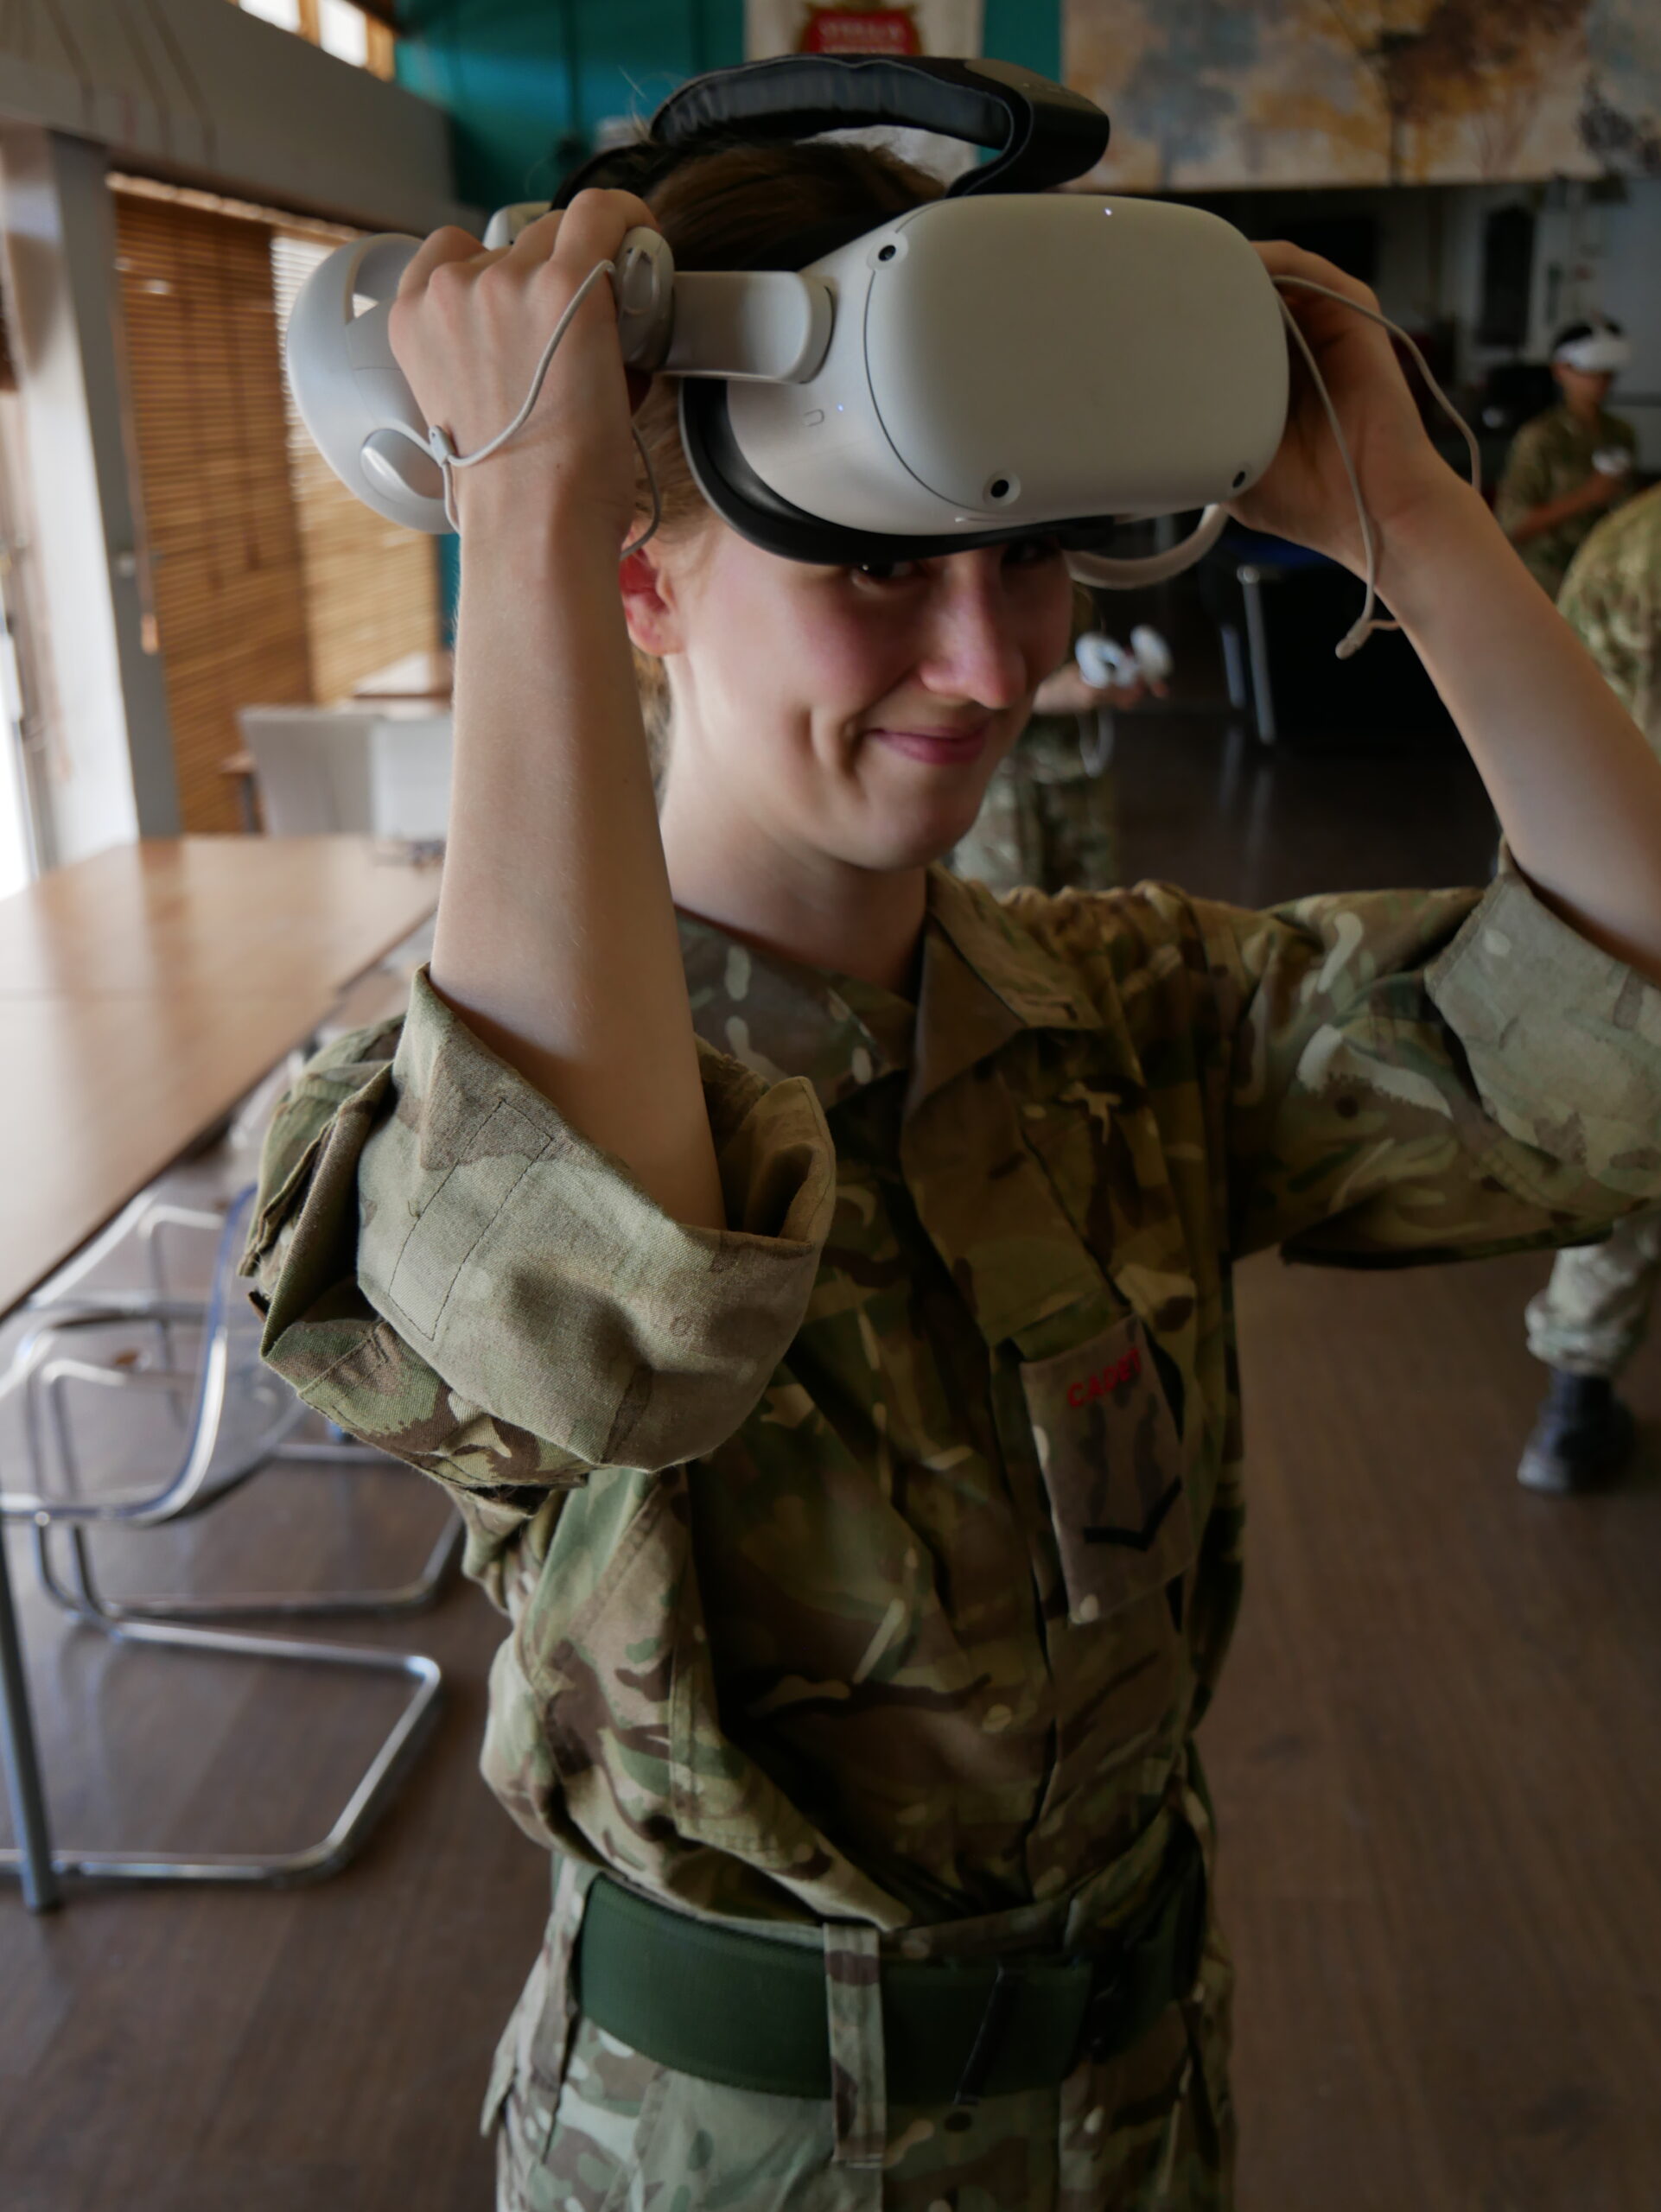 Cadet with a VR headset